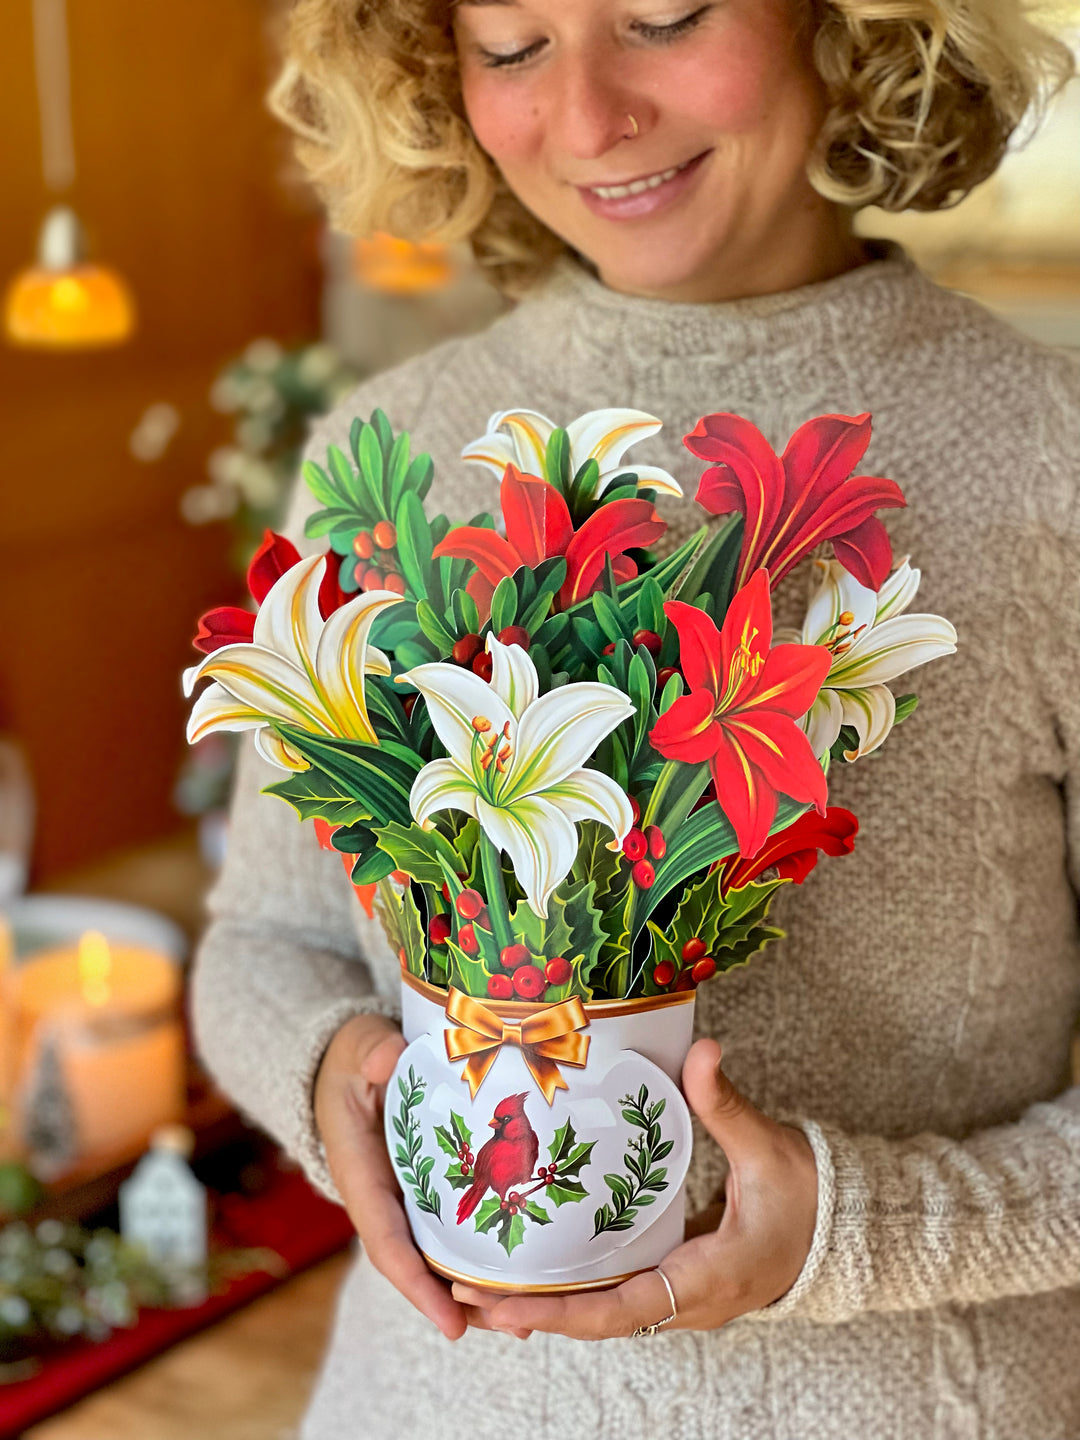 Winter Joy bouquet of lilies and holly